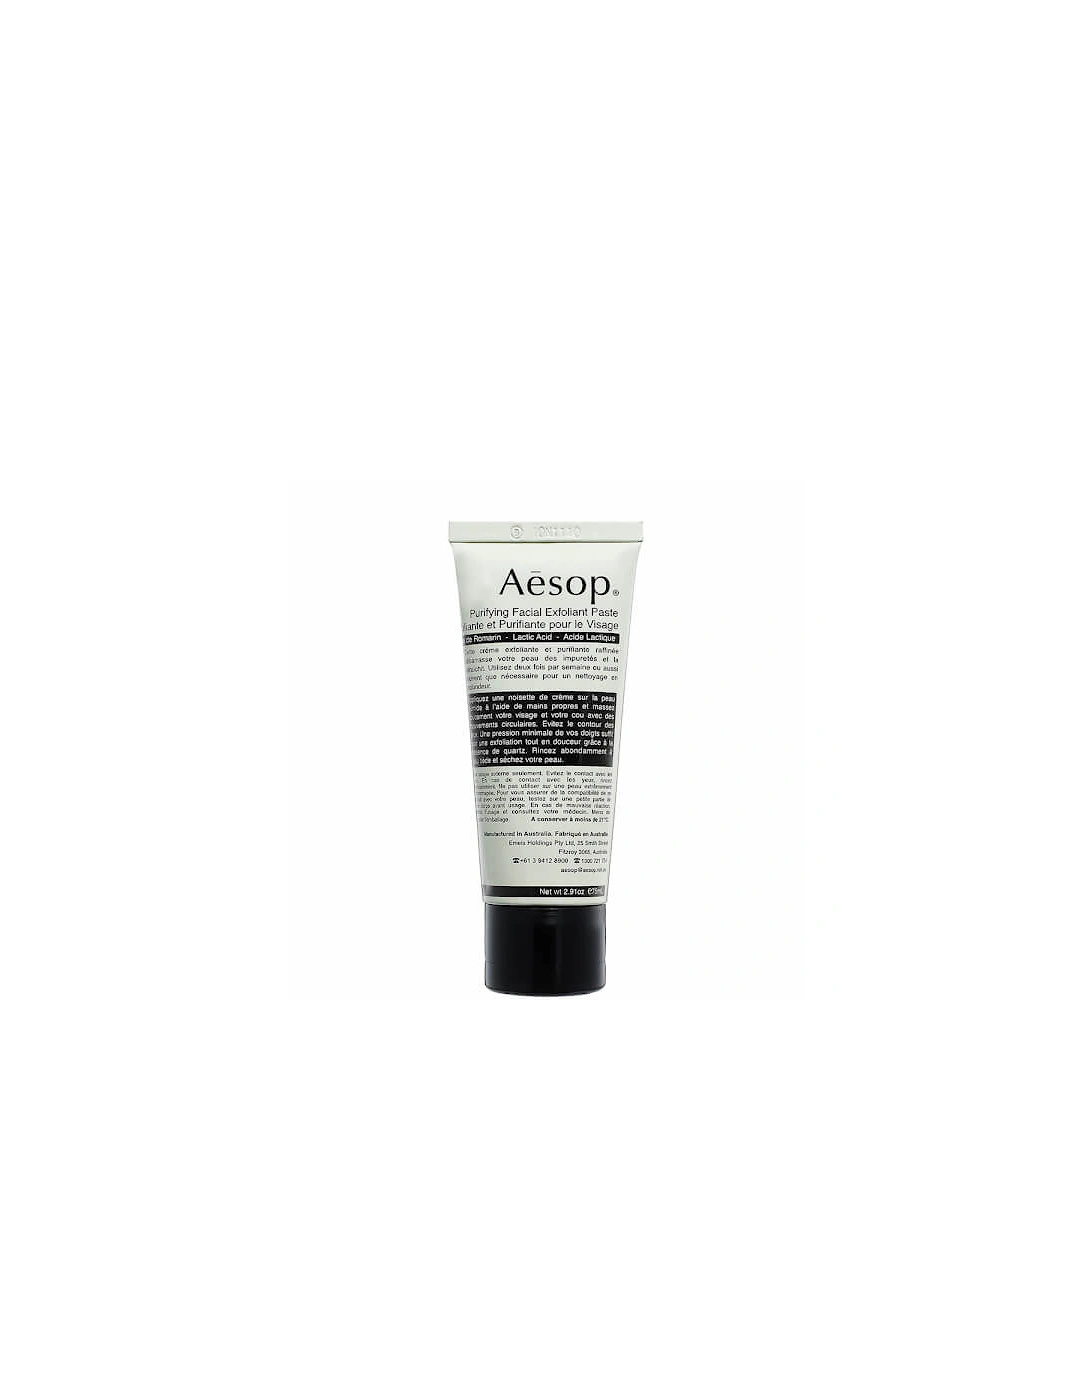 Purifying Facial Exfoliating Paste 75ml - - Purifying Facial Exfoliating Paste 75ml - siv - Purifying Facial Exfoliating Paste 75ml - ningxye - Purifying Facial Exfoliating Paste 75ml - Kaybar007 - Purifying Facial Exfoliating Paste 75ml - svevuccia - Purifying Facial Exfoliating Paste 75ml - Donna, 2 of 1